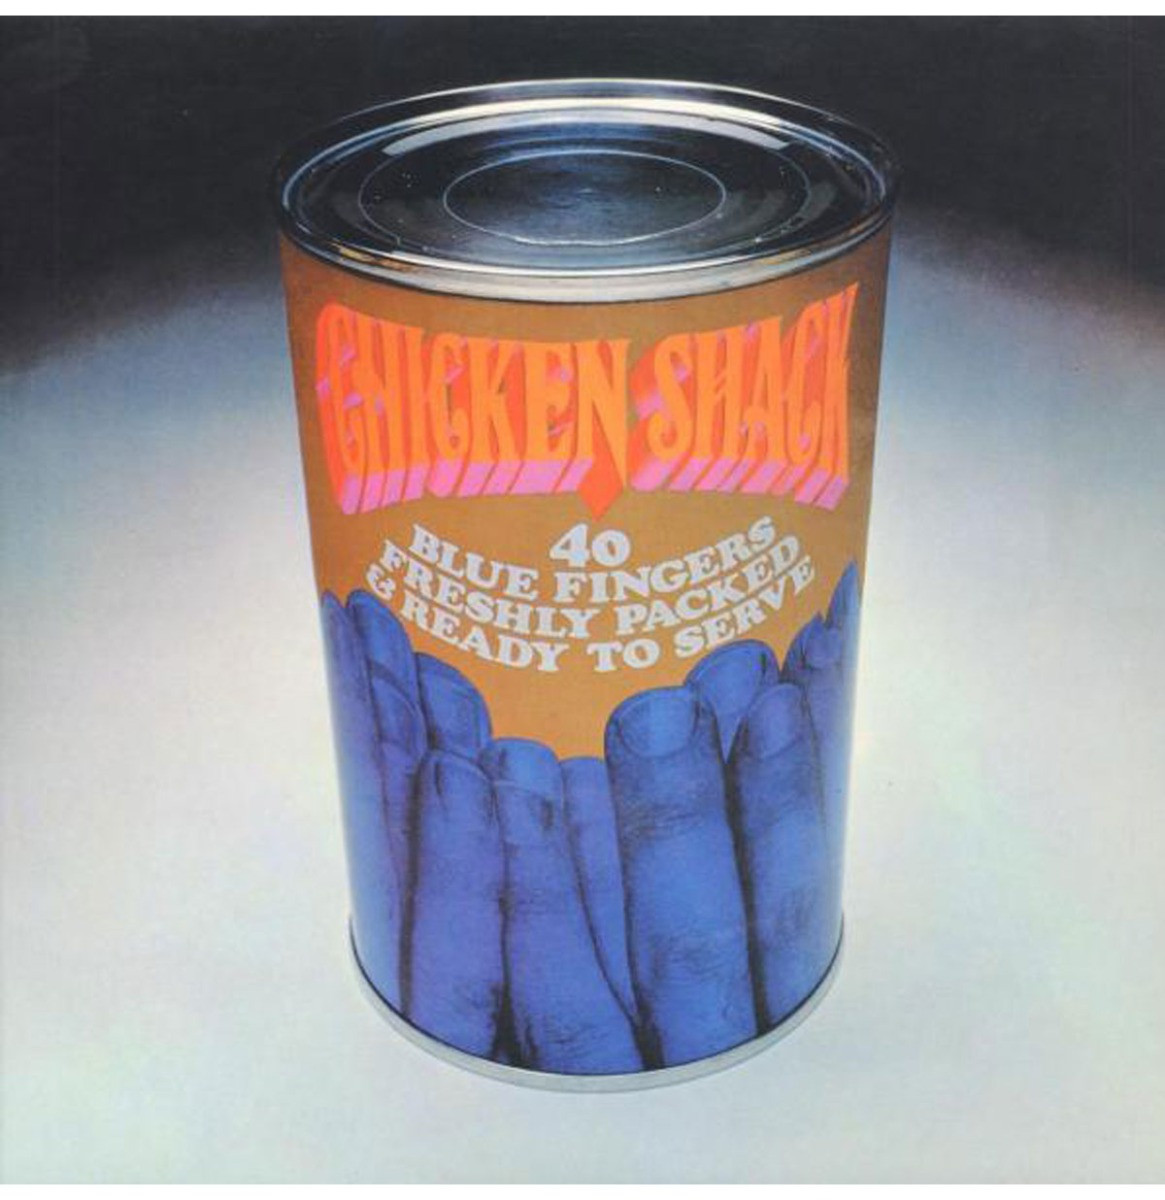 Chicken Shack - 40 Blue Fingers Freshly Packed and Ready To Serve LP